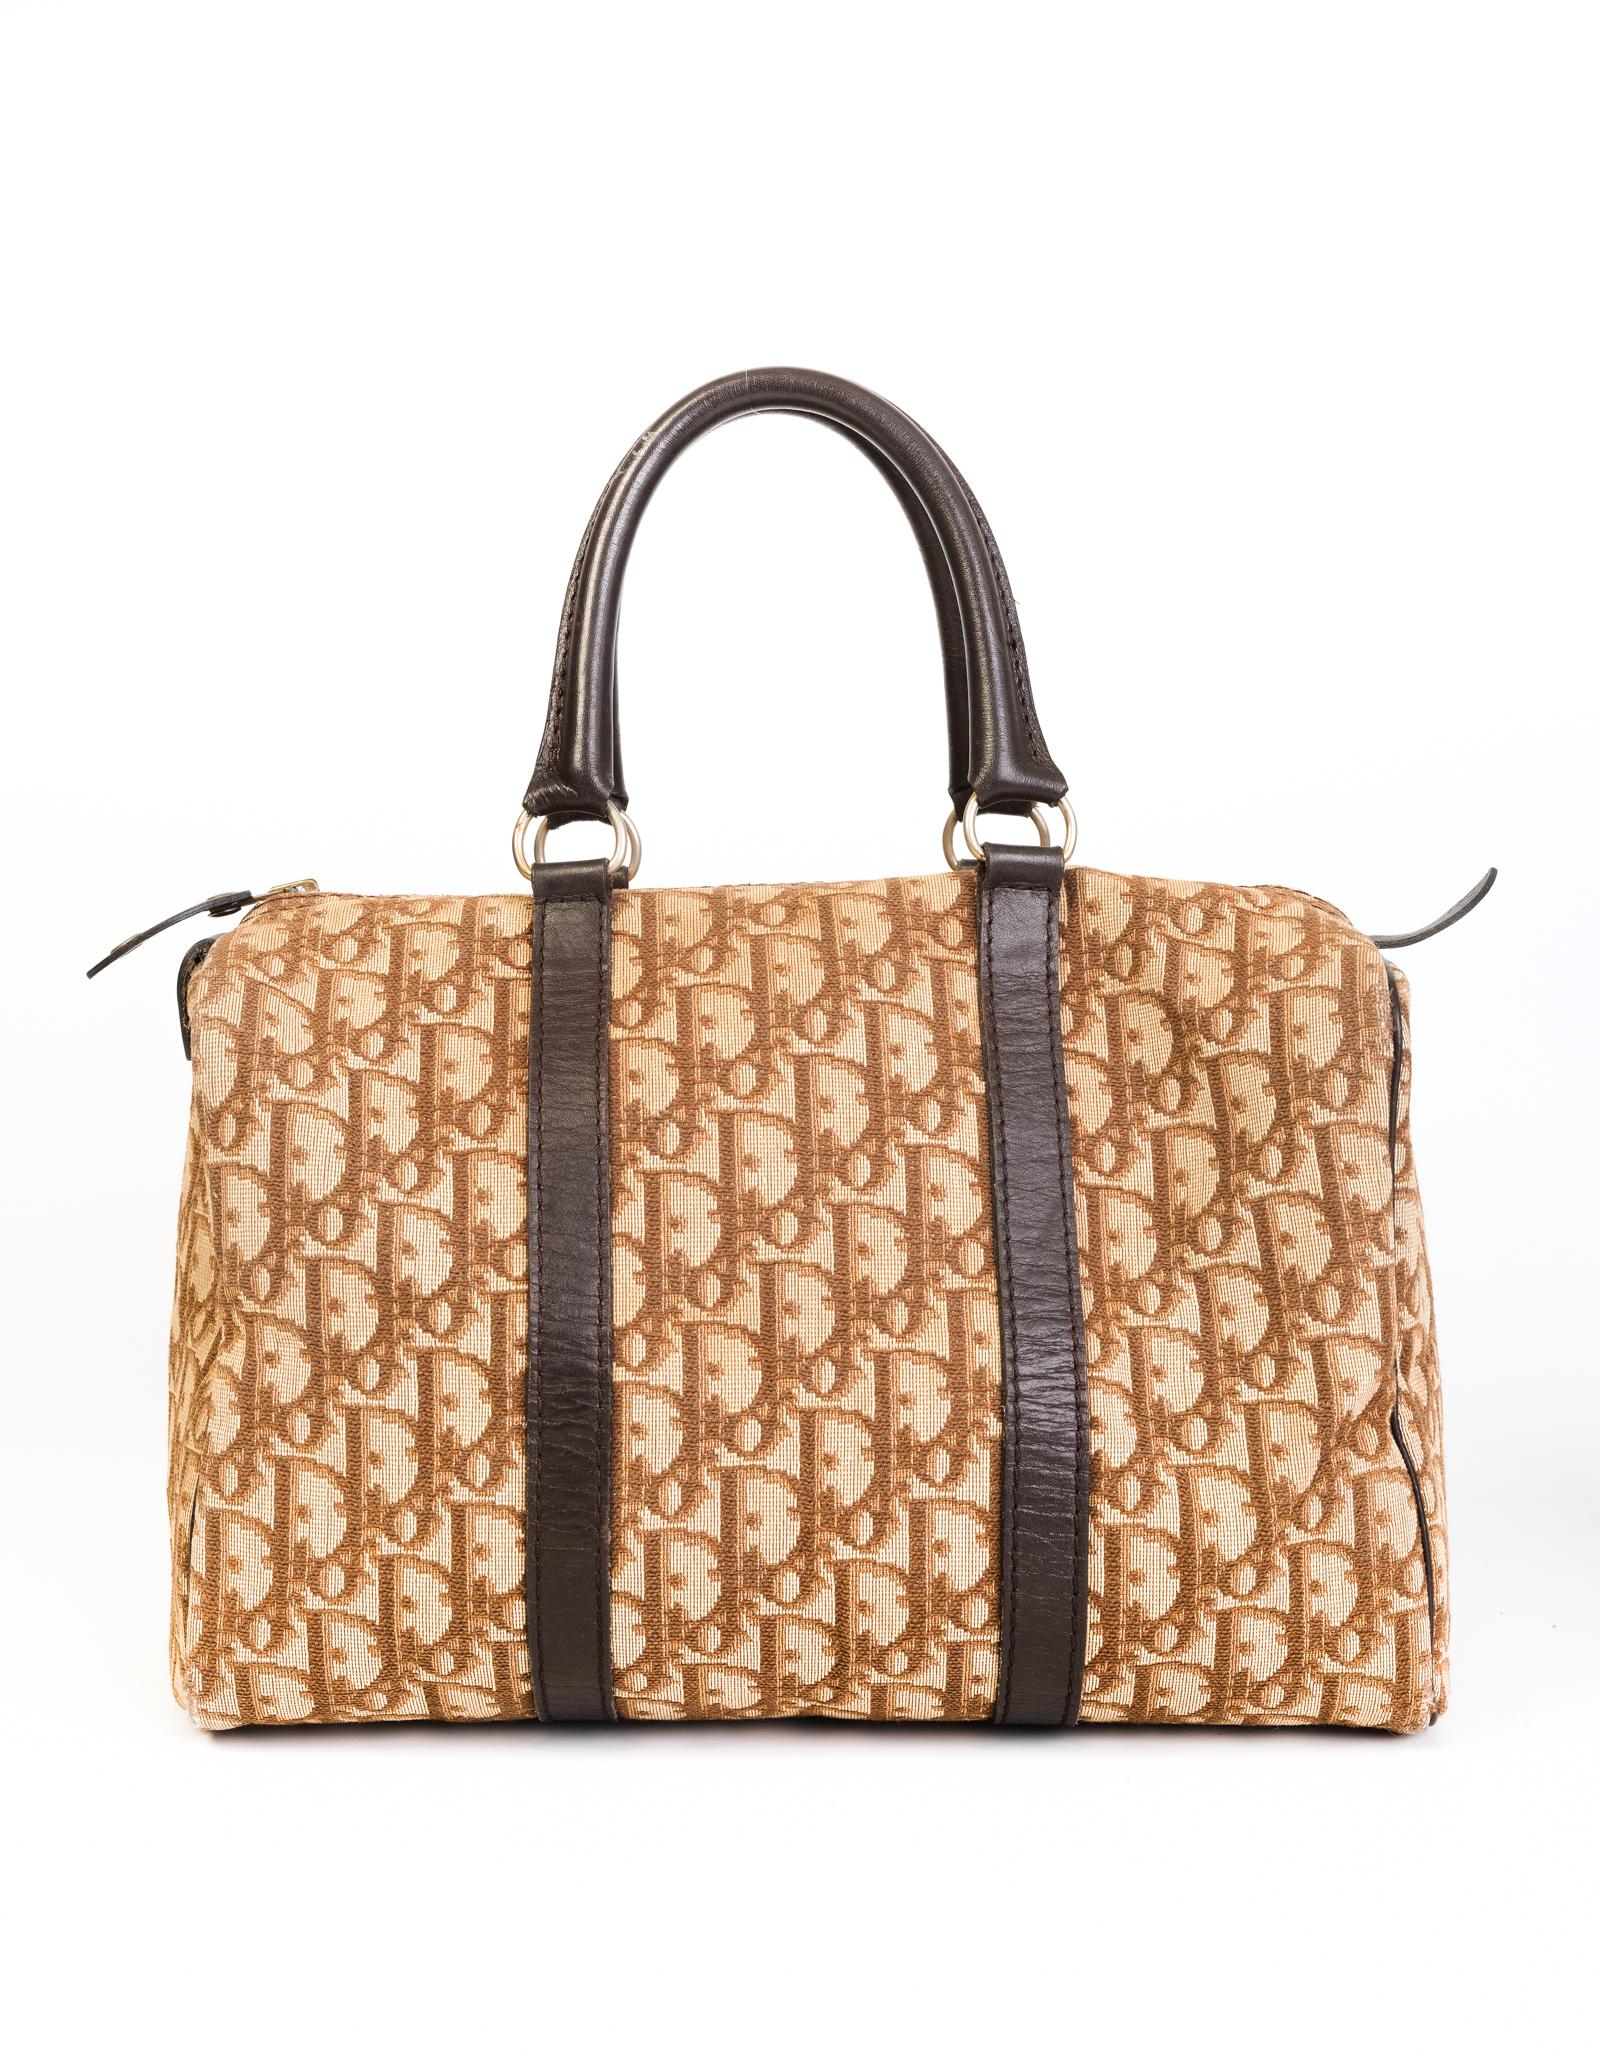 Classic Dior Boston/Bowler bag measuring 30-cm in length and made with tan and brown monogrammed canvas. Featuring supple brown leather trimming throughout, dual roller leather top handles with gold toned links and woven fabric interior